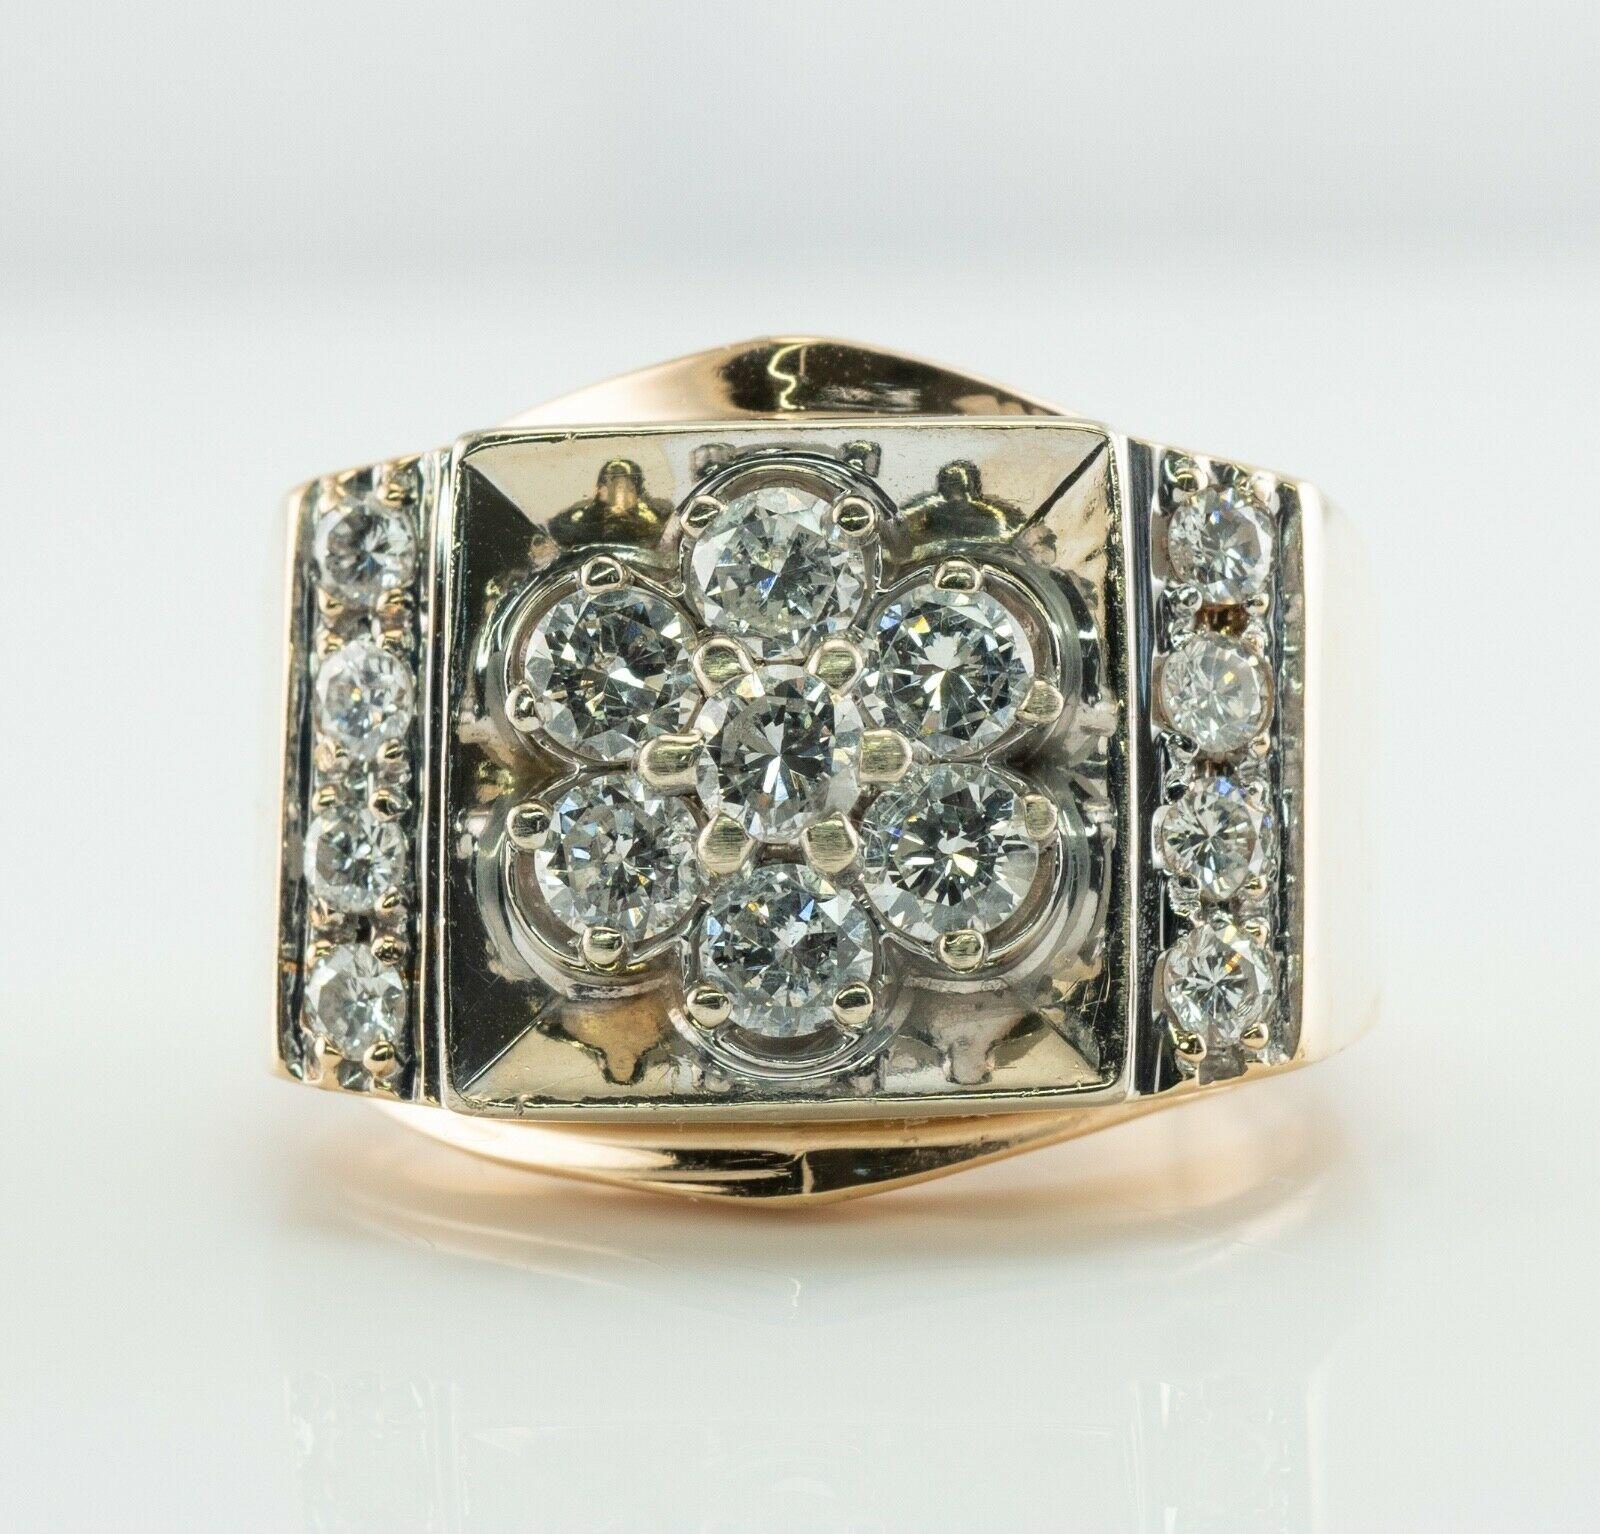 This amazing vintage ring for a gentleman is finely crafted in solid 14K Yellow Gold and White Gold for the top (tested and guaranteed) and set with white and fiery round brilliant cut diamonds. Seven diamonds in the center and eight more diamonds